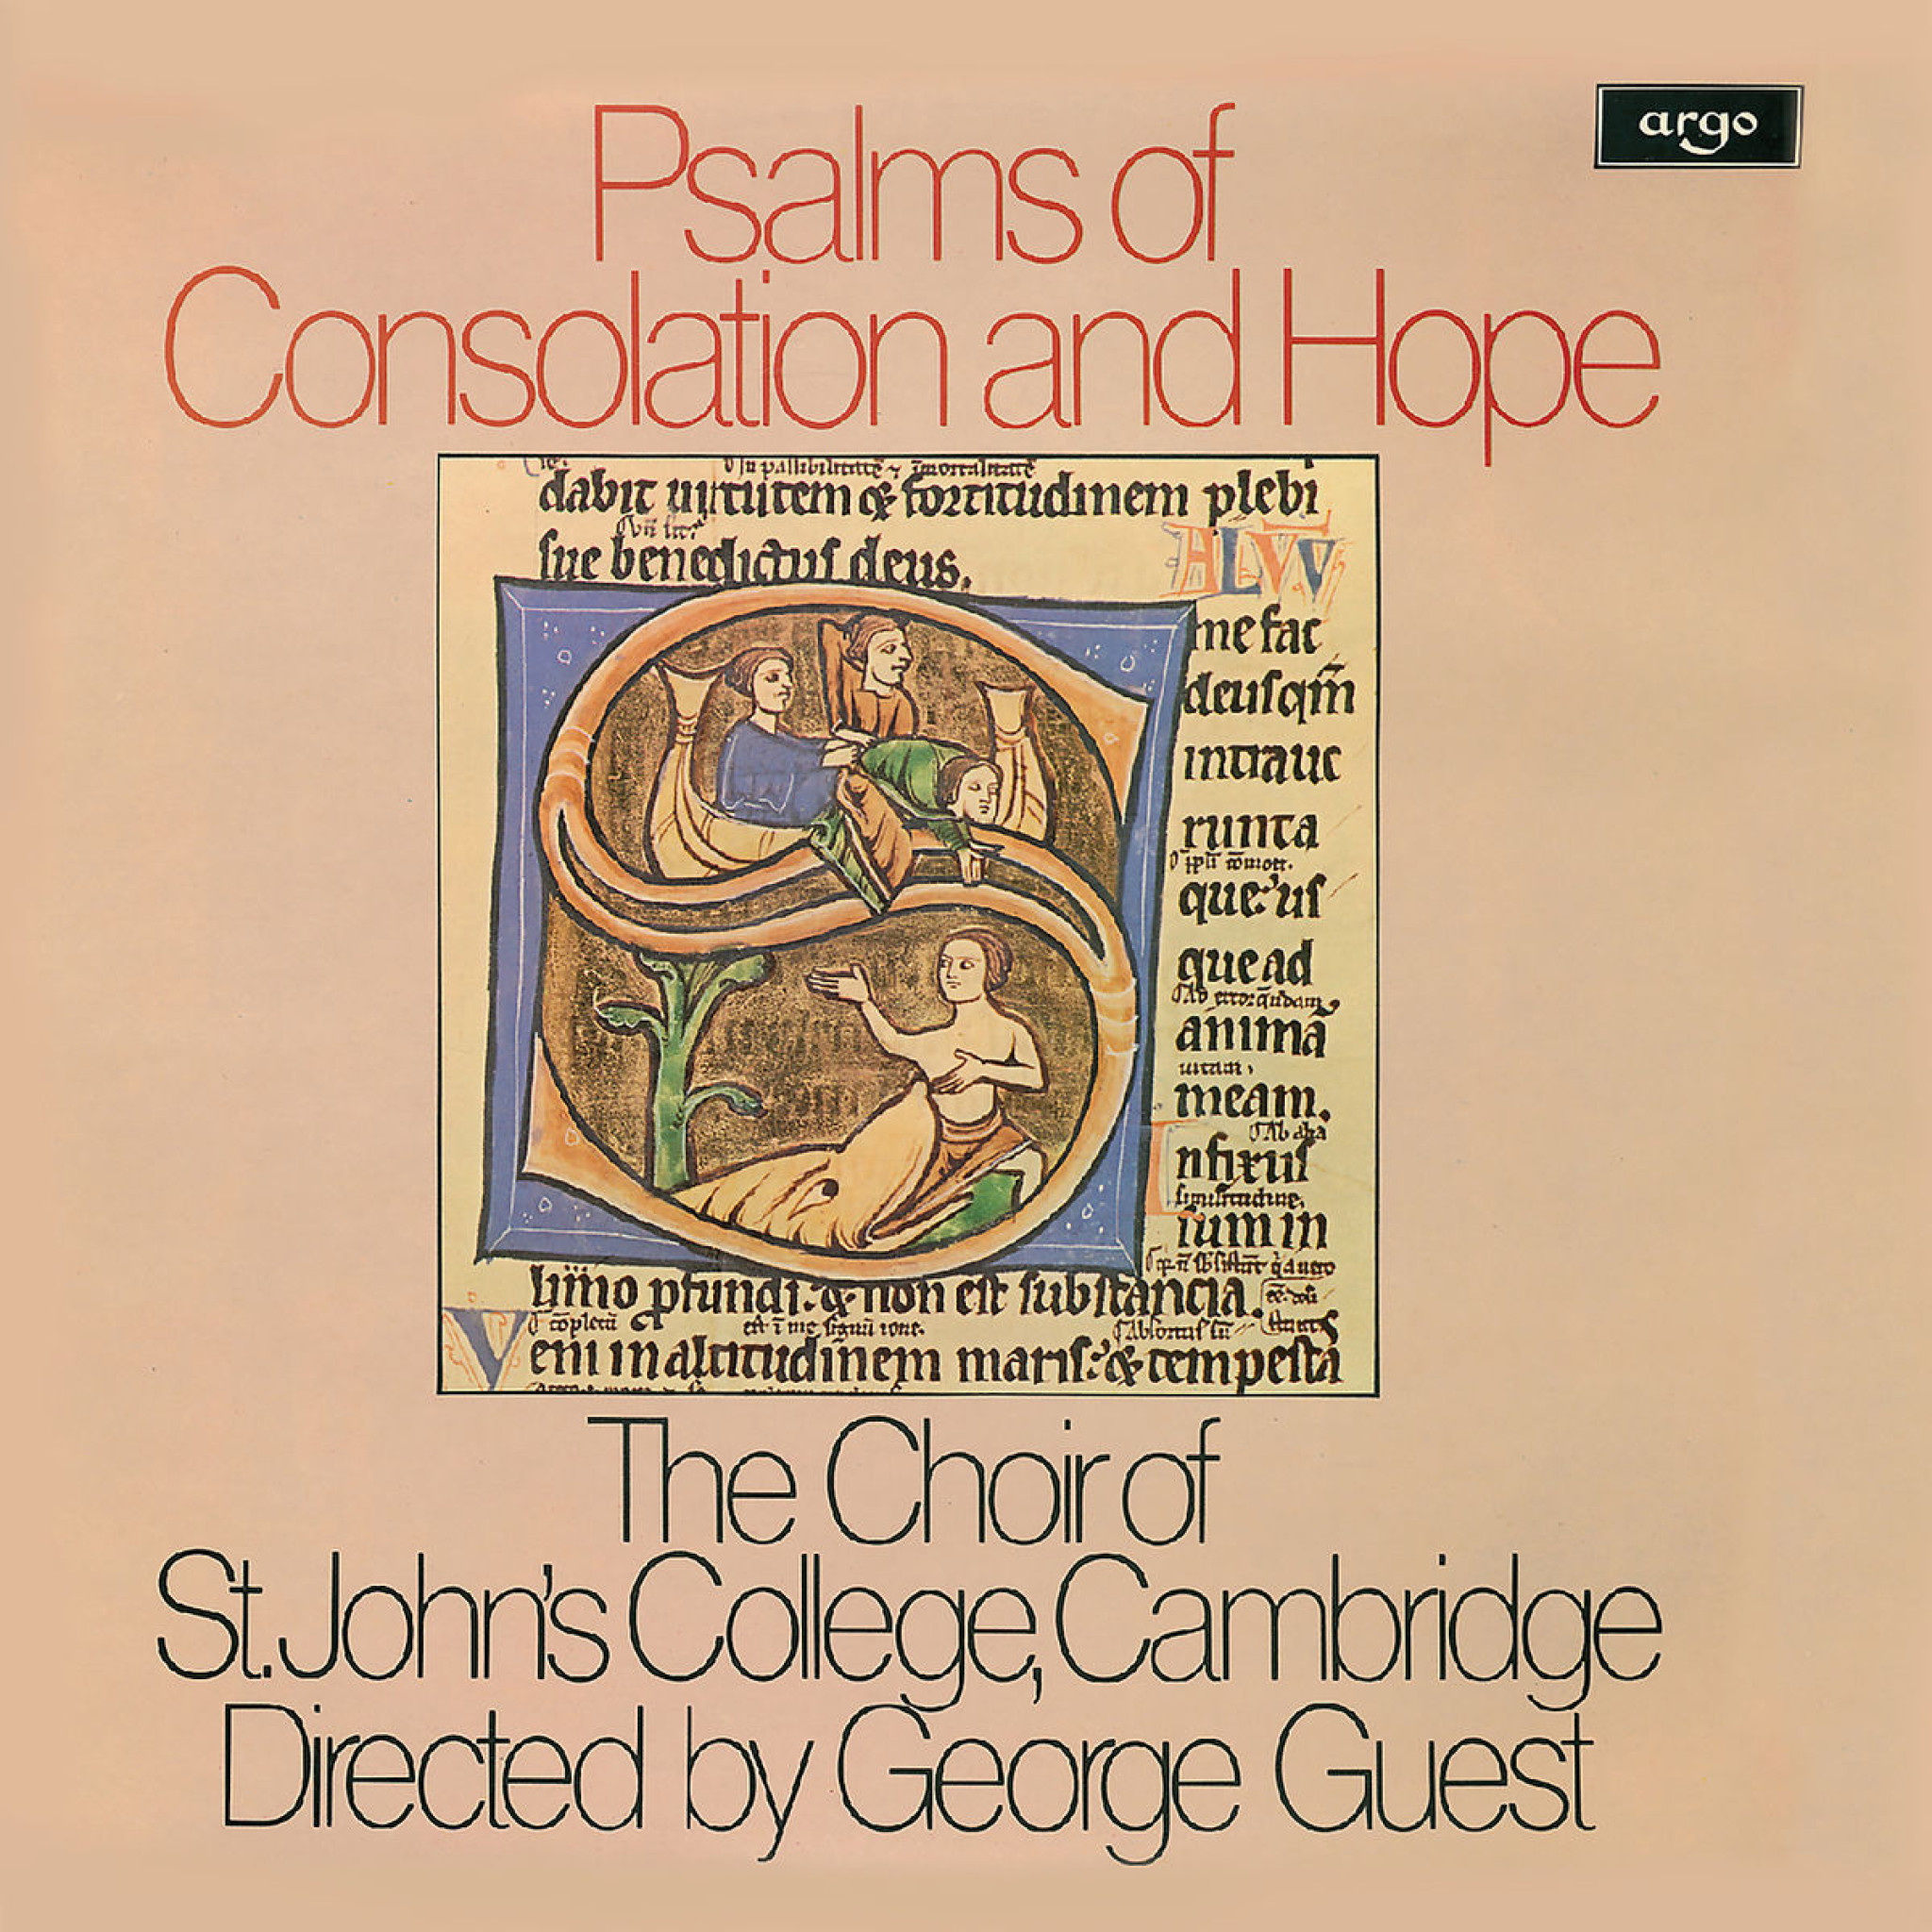 PSALMS OF CONSOLATION AND HOPE